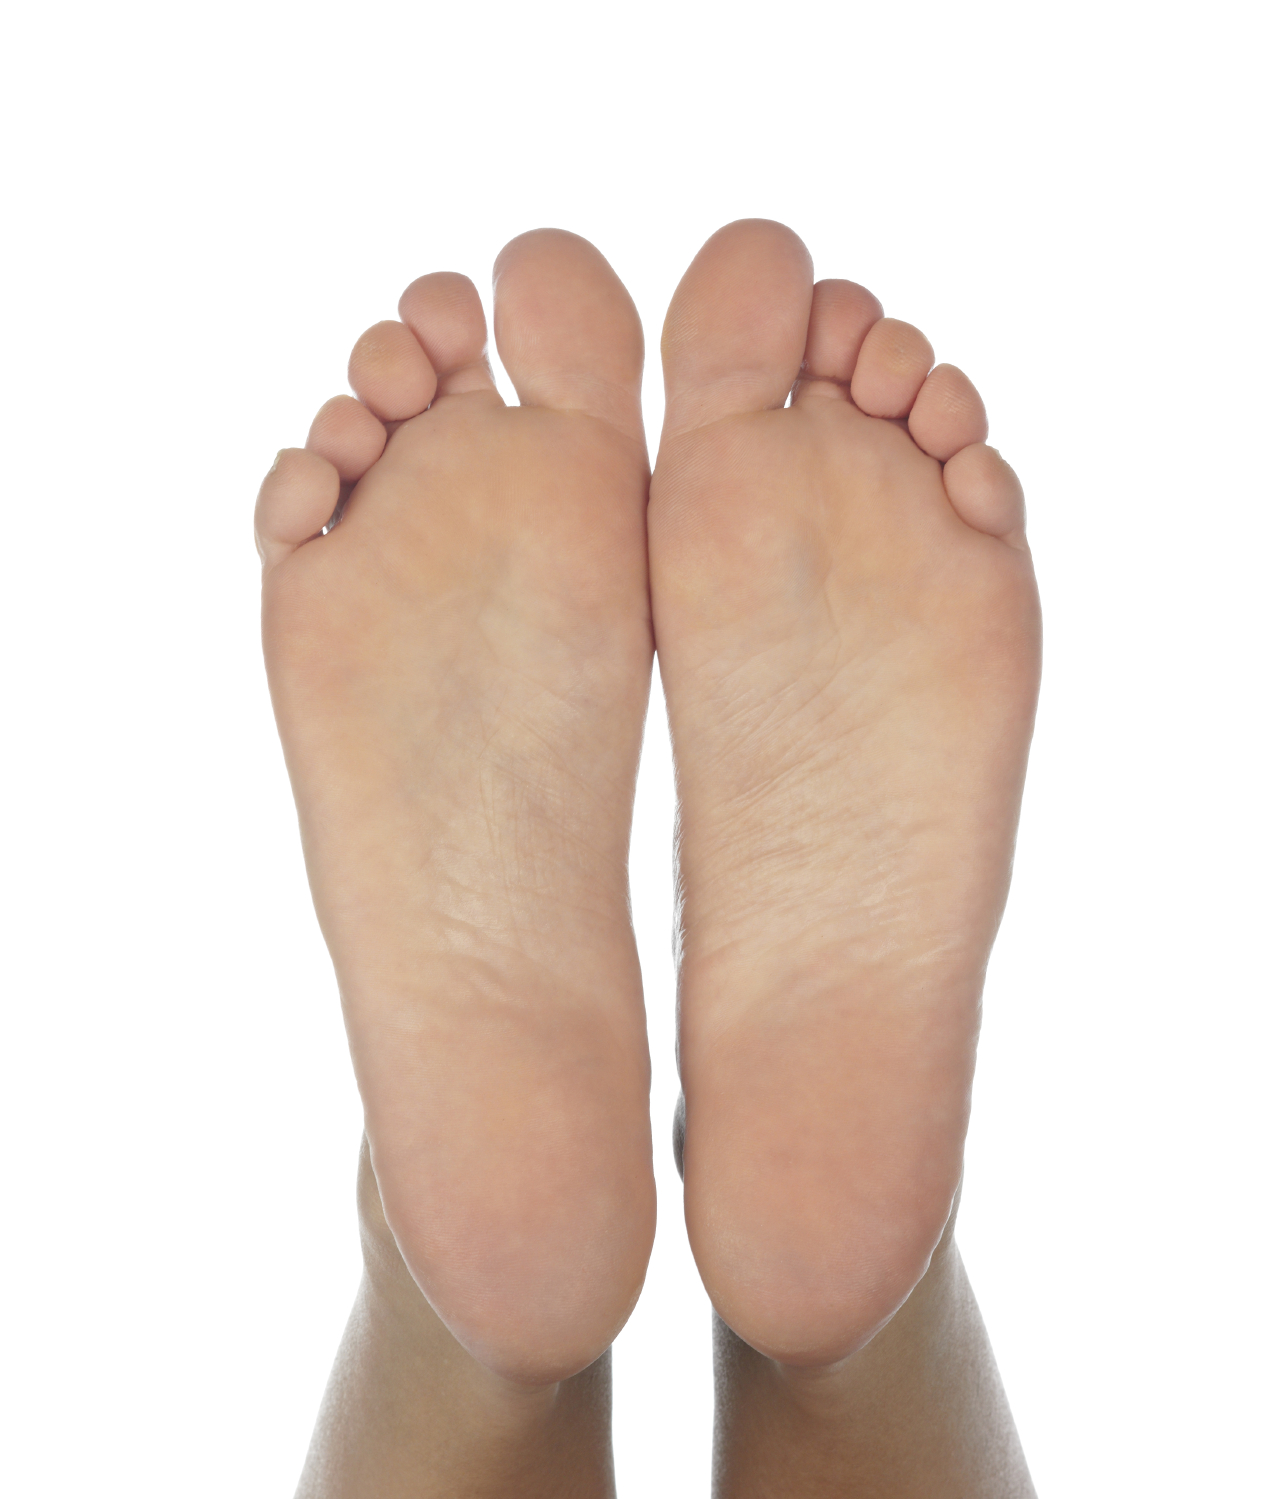 Triad Foot & Ankle Center